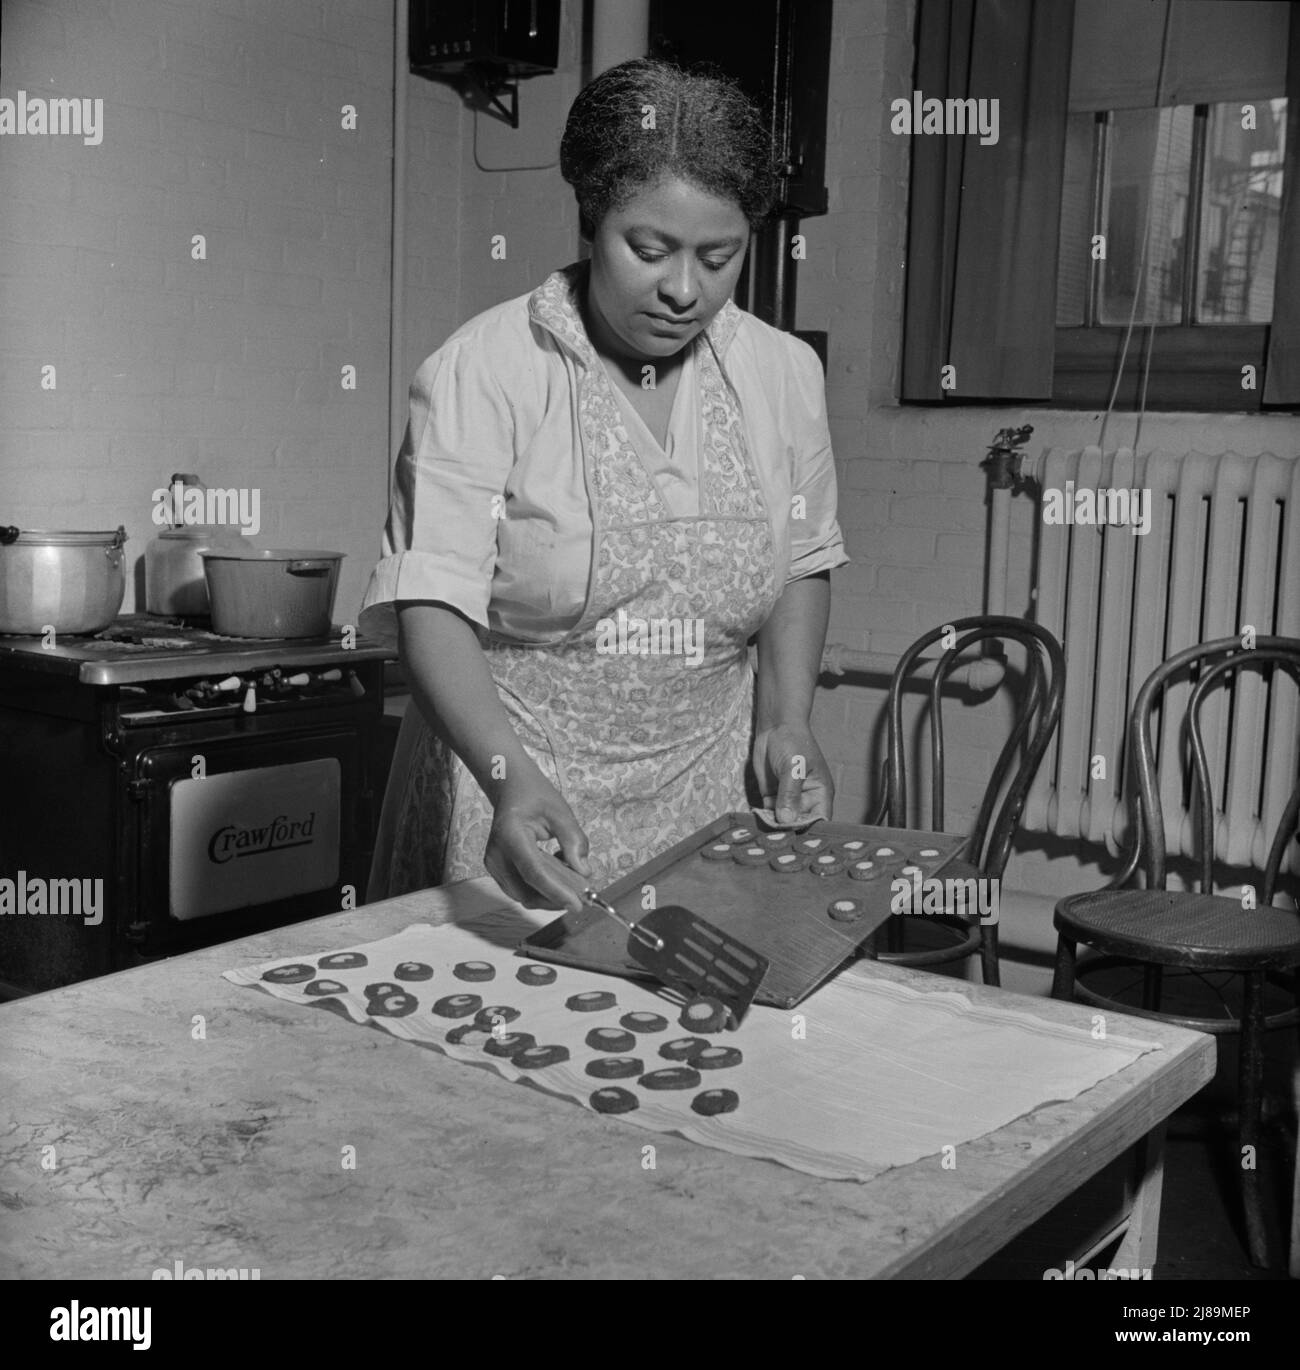 New Britain, Connecticut. A child care center opened September 15, 1942, for thirty children, ages two through five of mothers engaged in war industry. The hours are 6:30 a.m. to 6 p.m. six days per week. The dietician baking cookies. Stock Photo